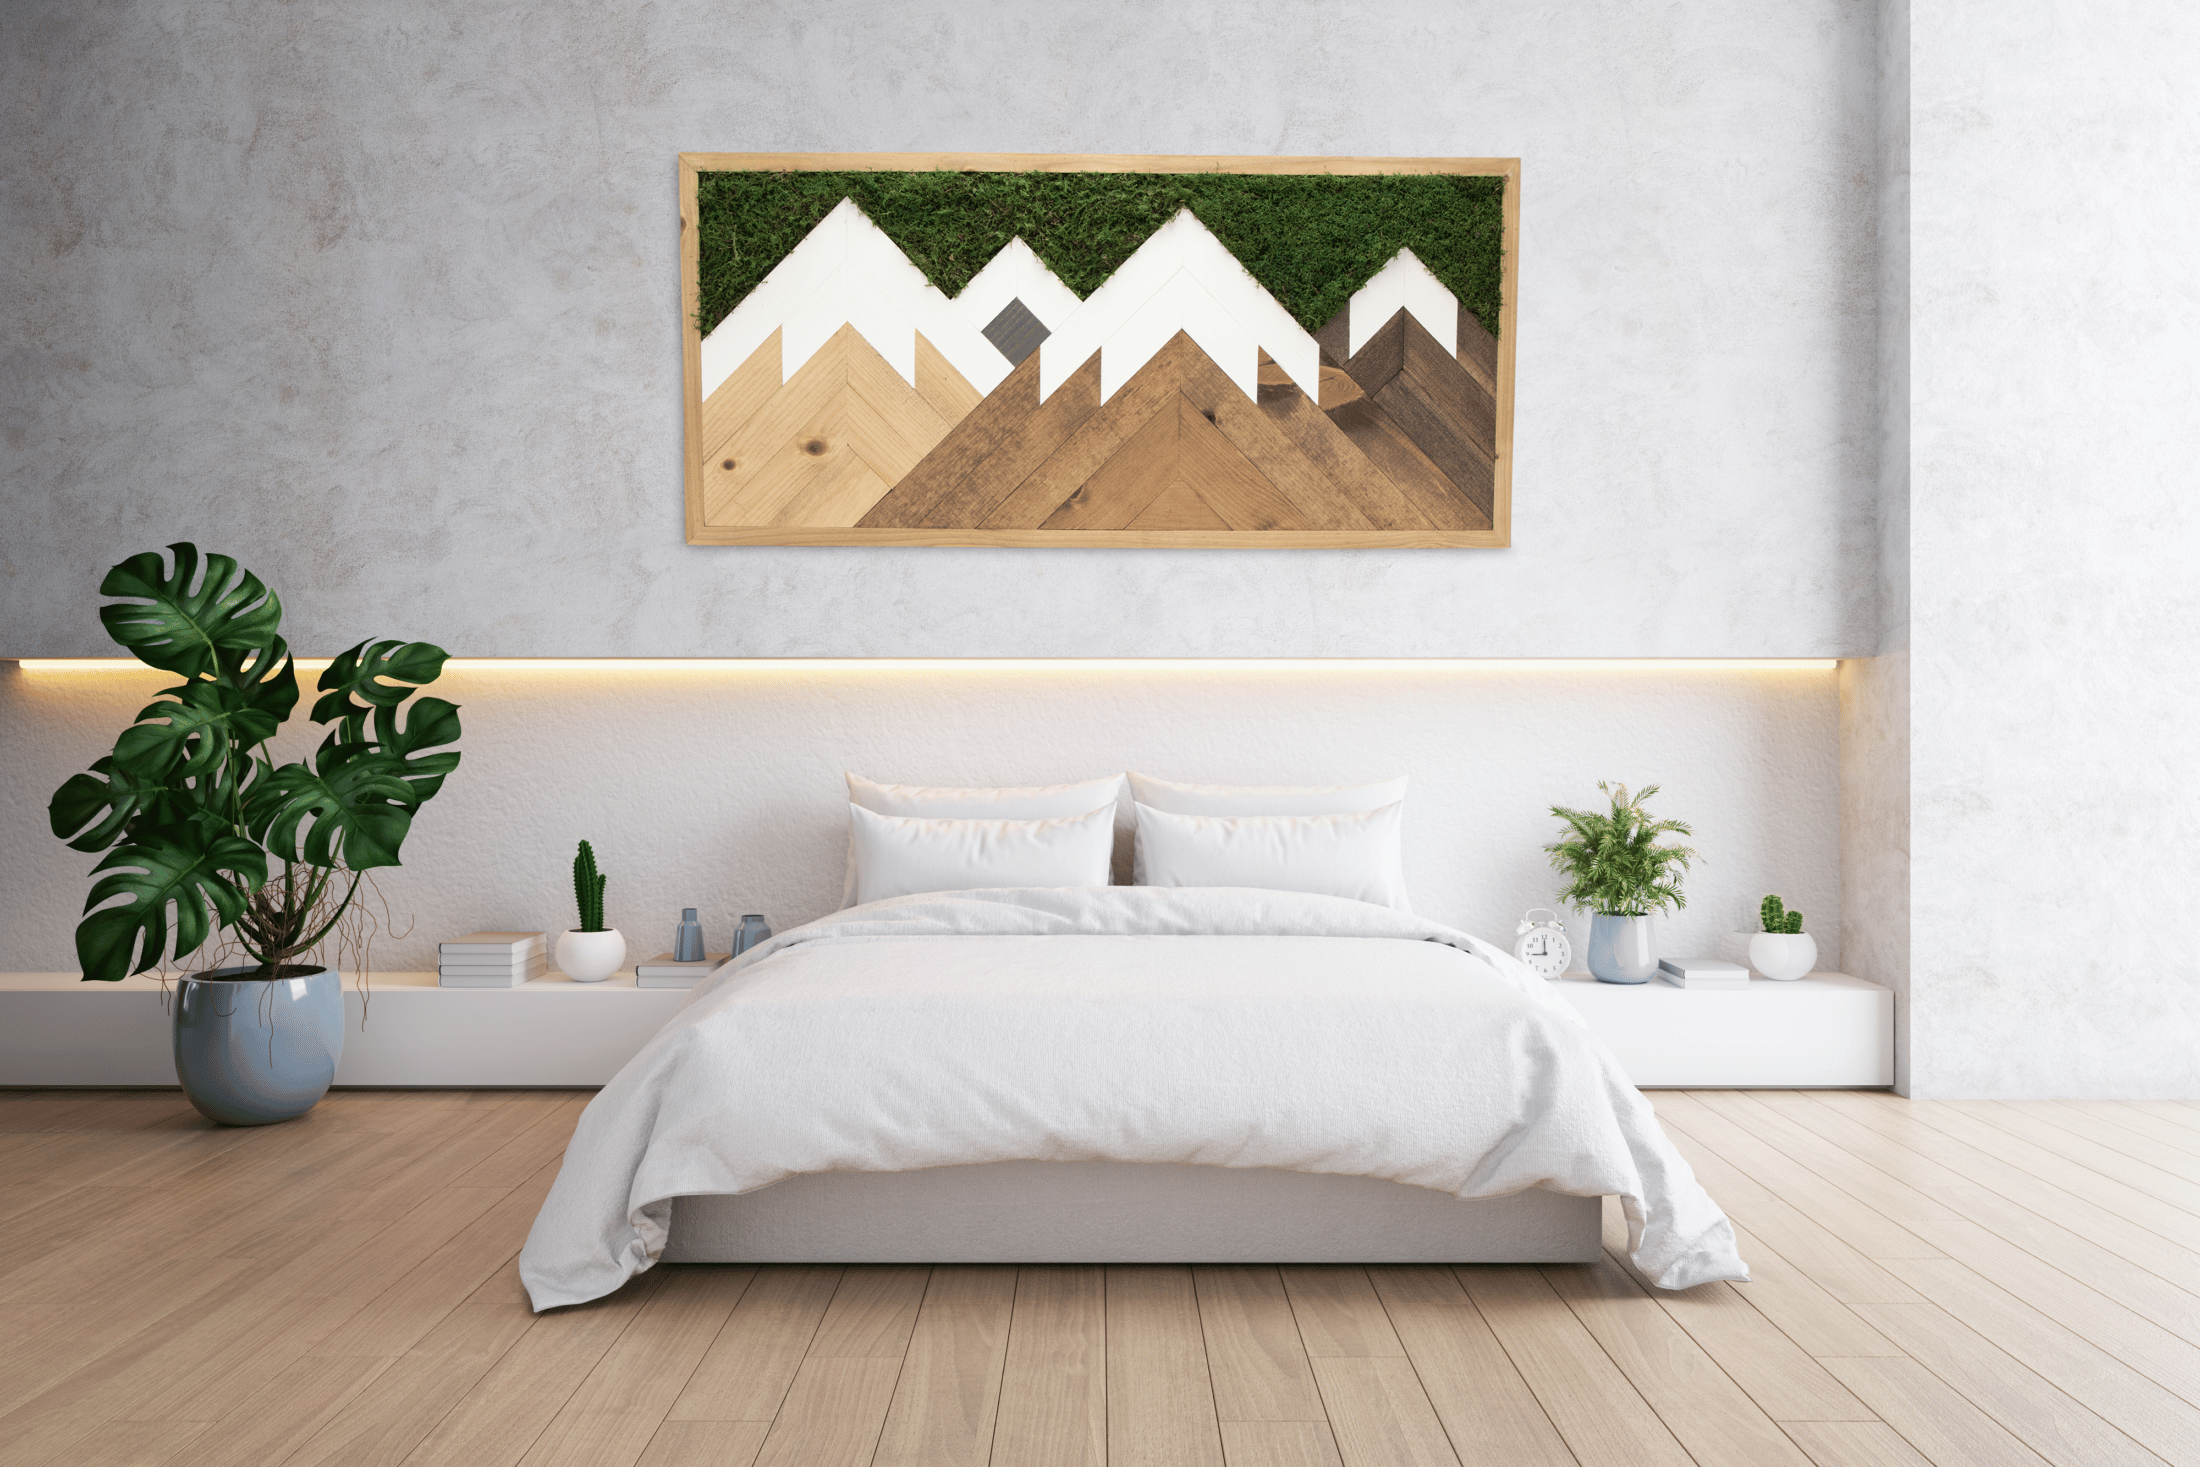 Living moss wall art that improves air quality and provides therapeutic relief from stress and anxiety. Moss wall art in home.